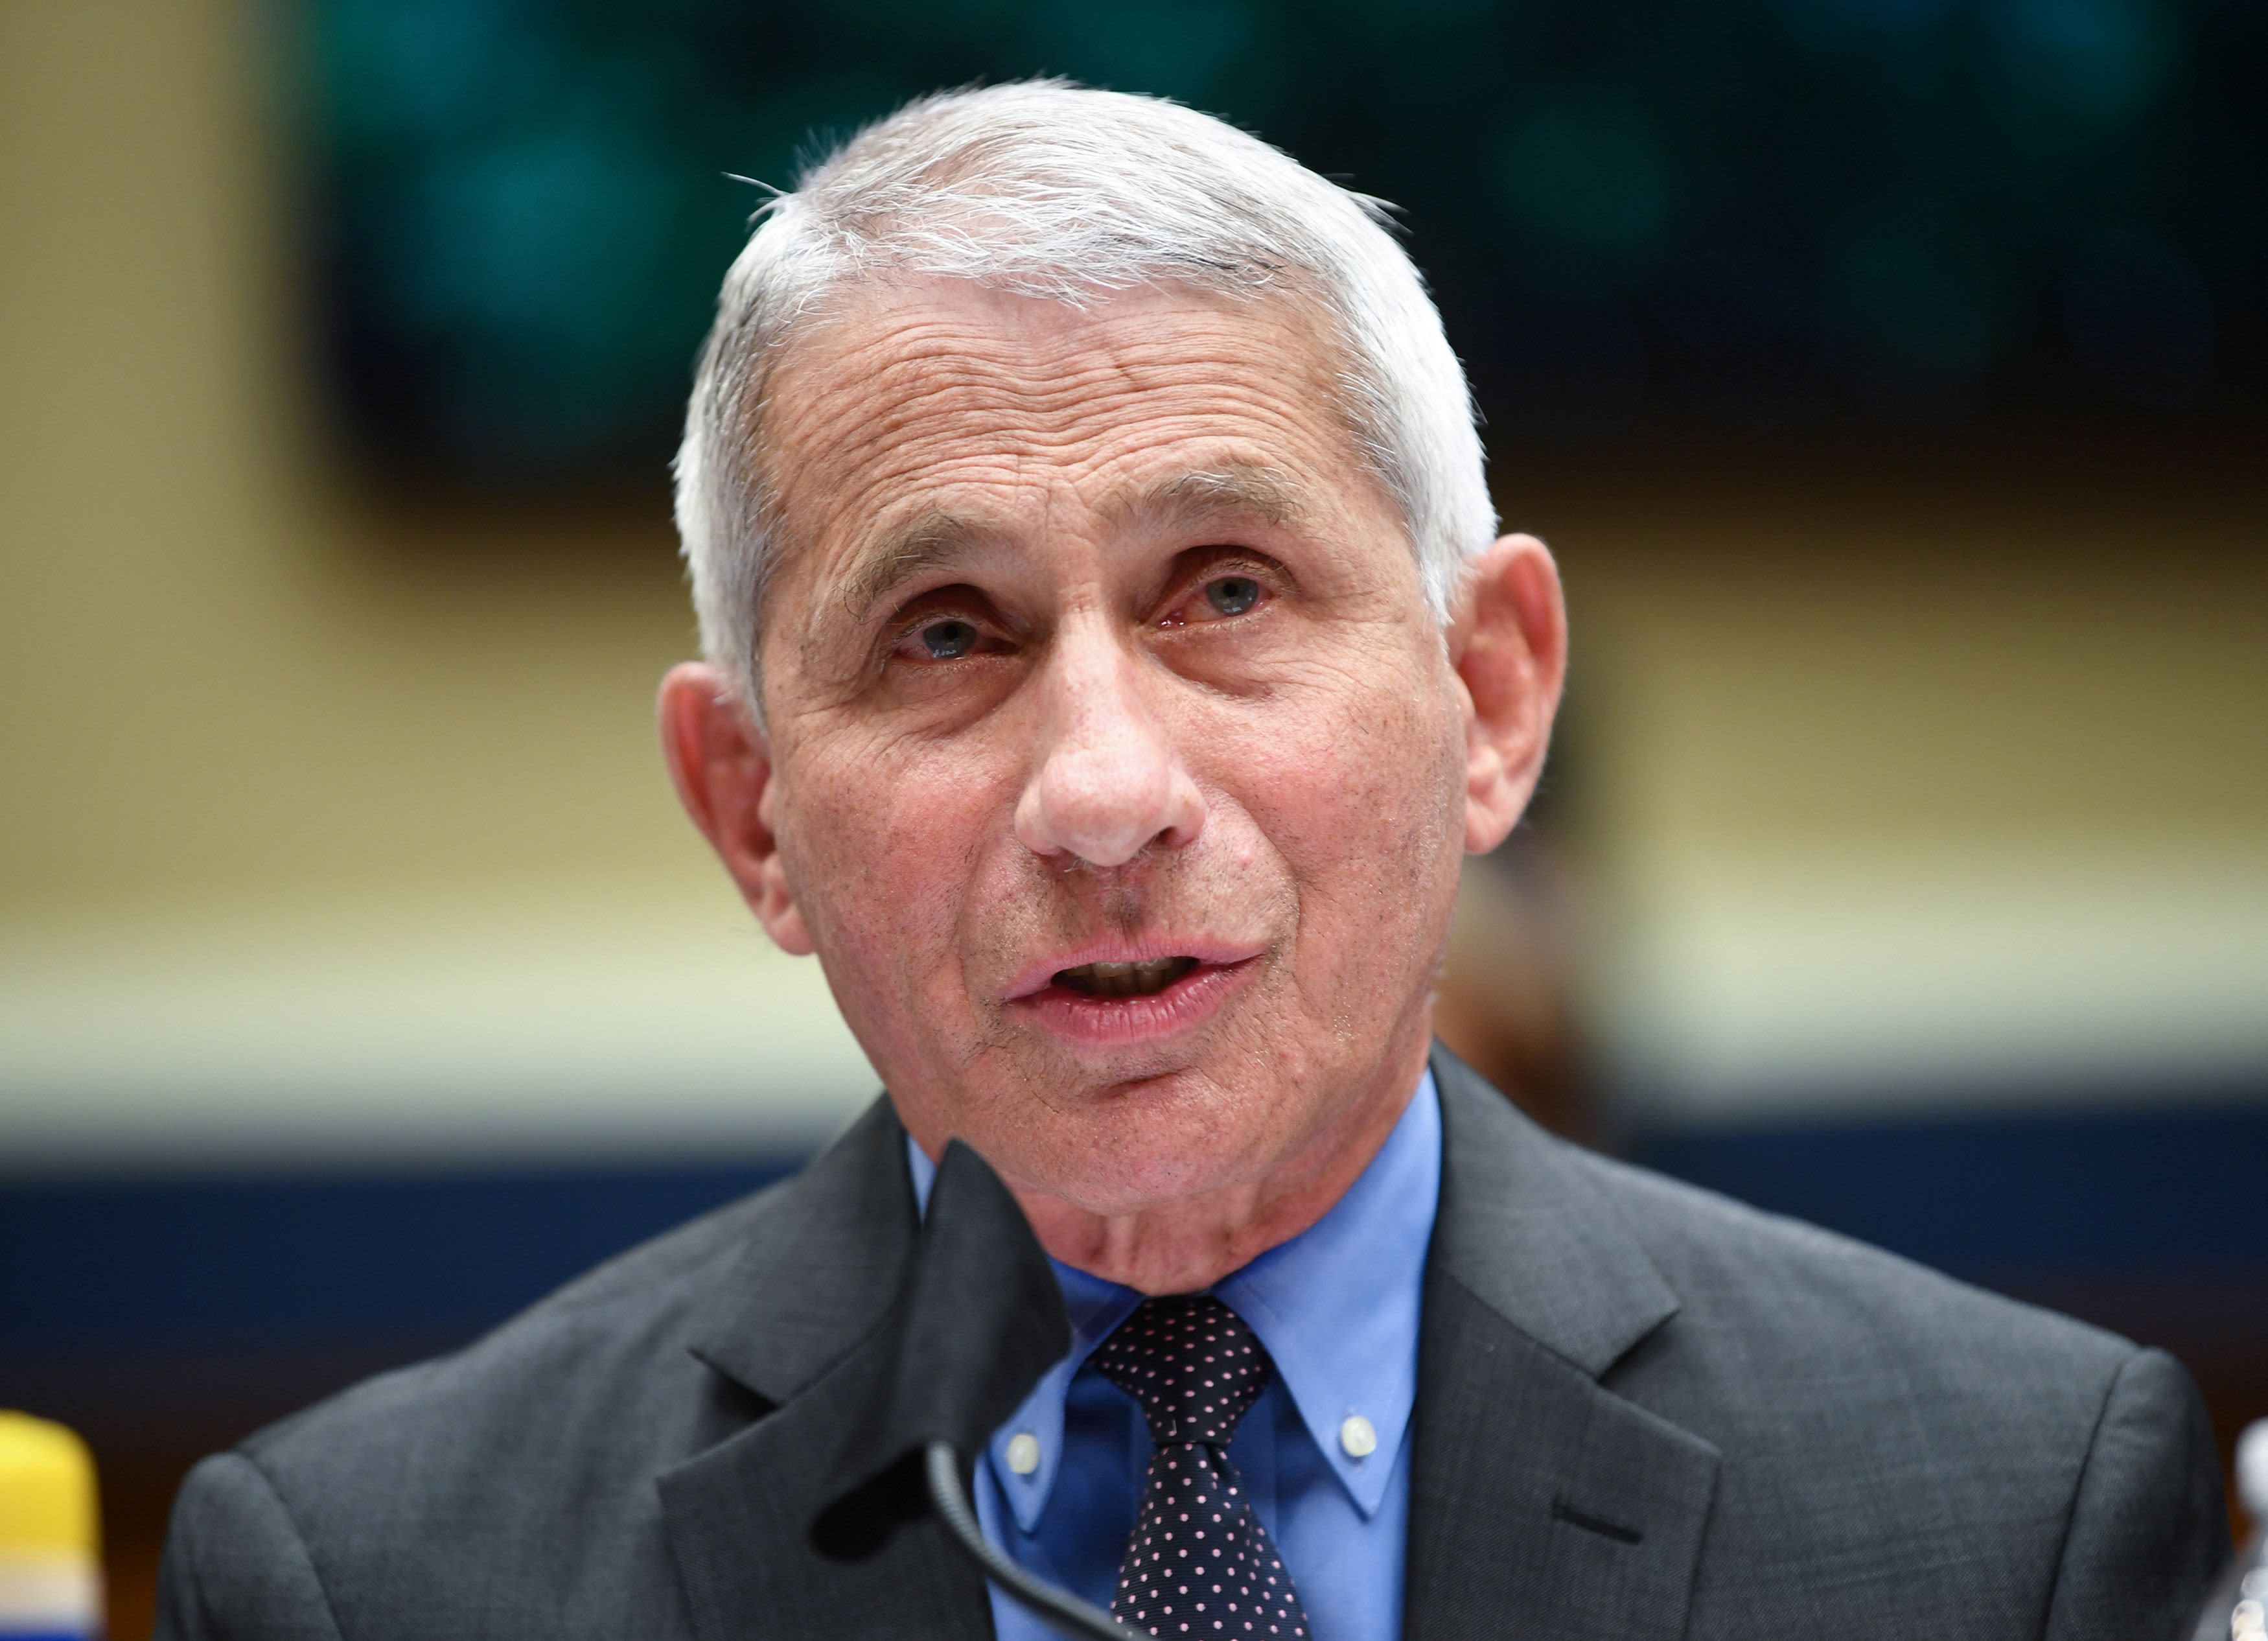 Dr. Anthony Fauci says U.S. coronavirus cases are surging because nation didn't totally shut down - CNBC